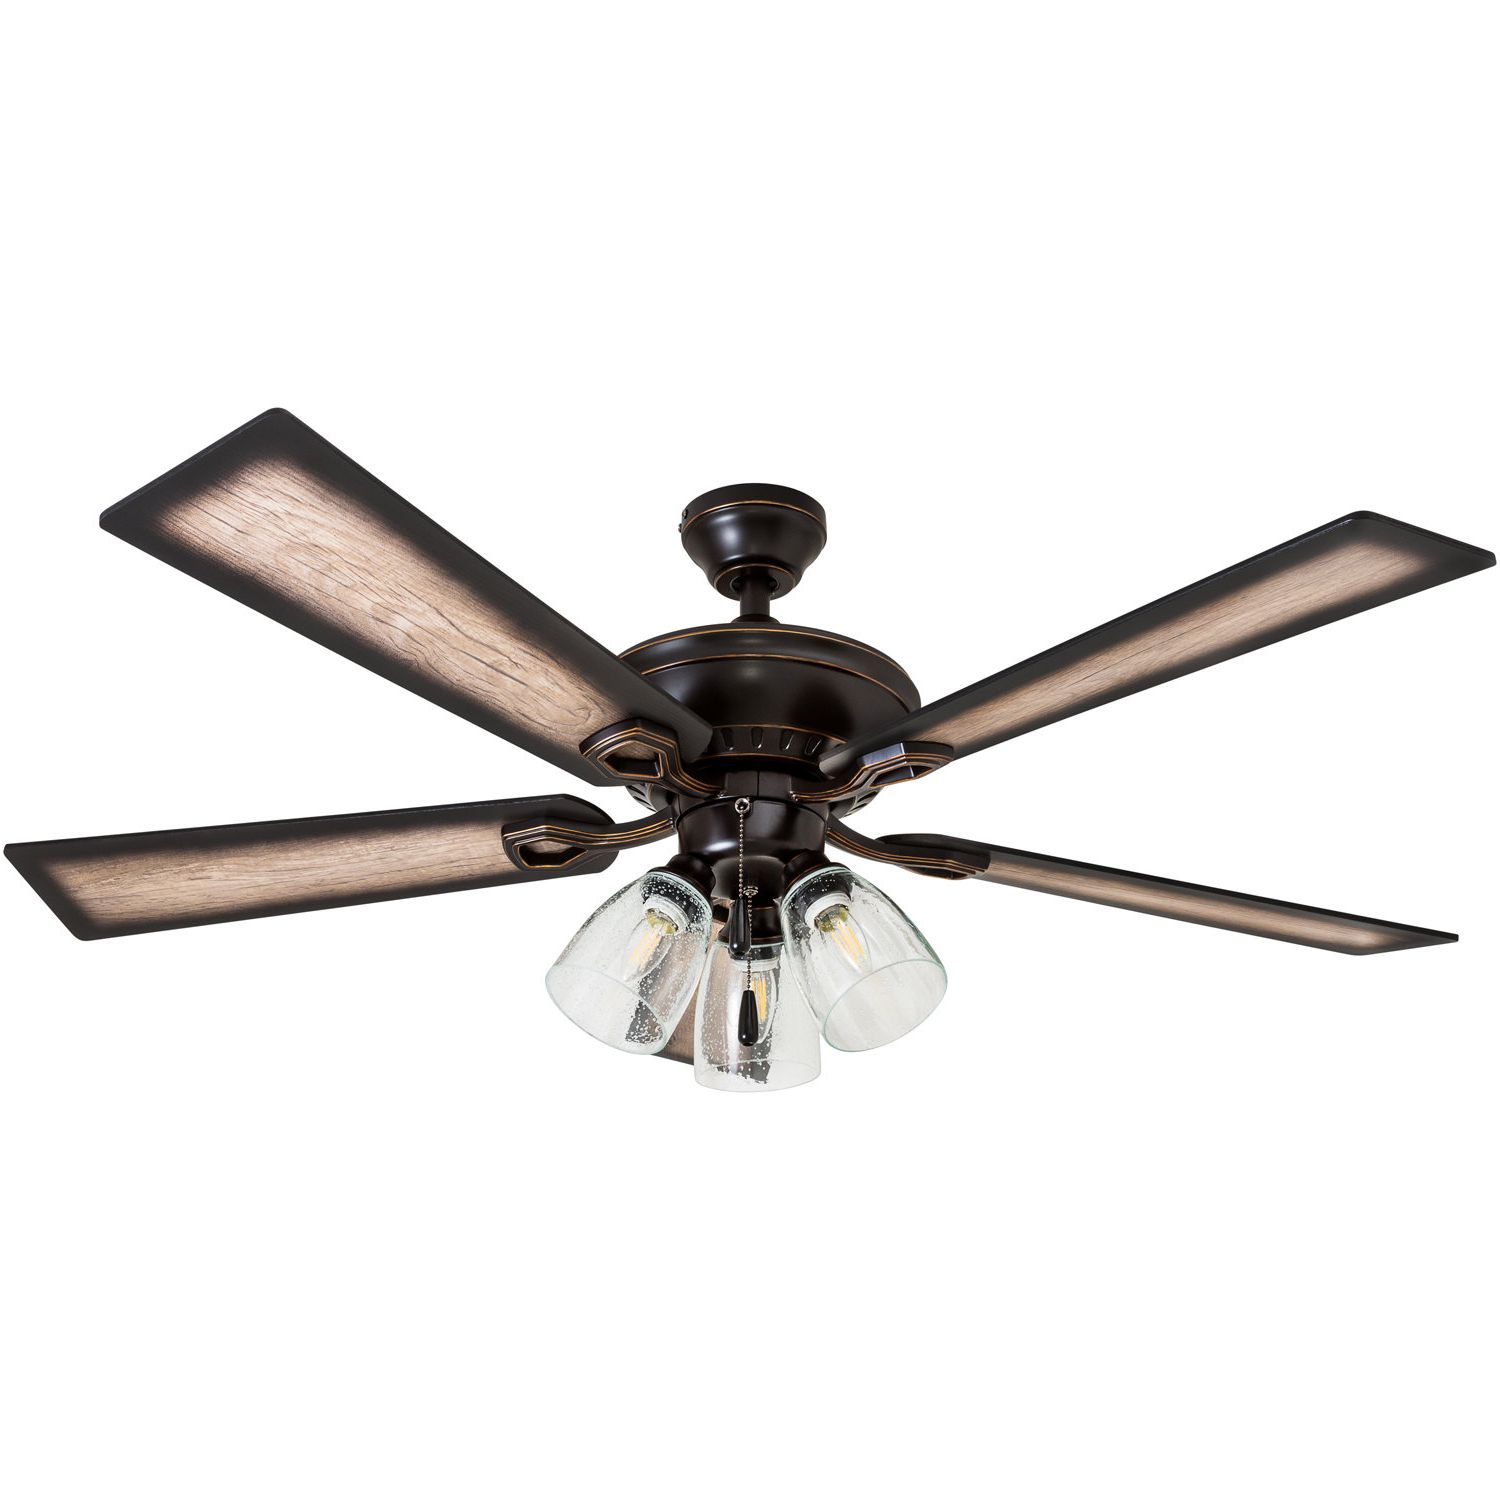 Sudie 5 Blade Led Ceiling Fans For Popular 52" O'hanlon 5 Blade Led Ceiling Fan, Light Kit Included (View 1 of 20)